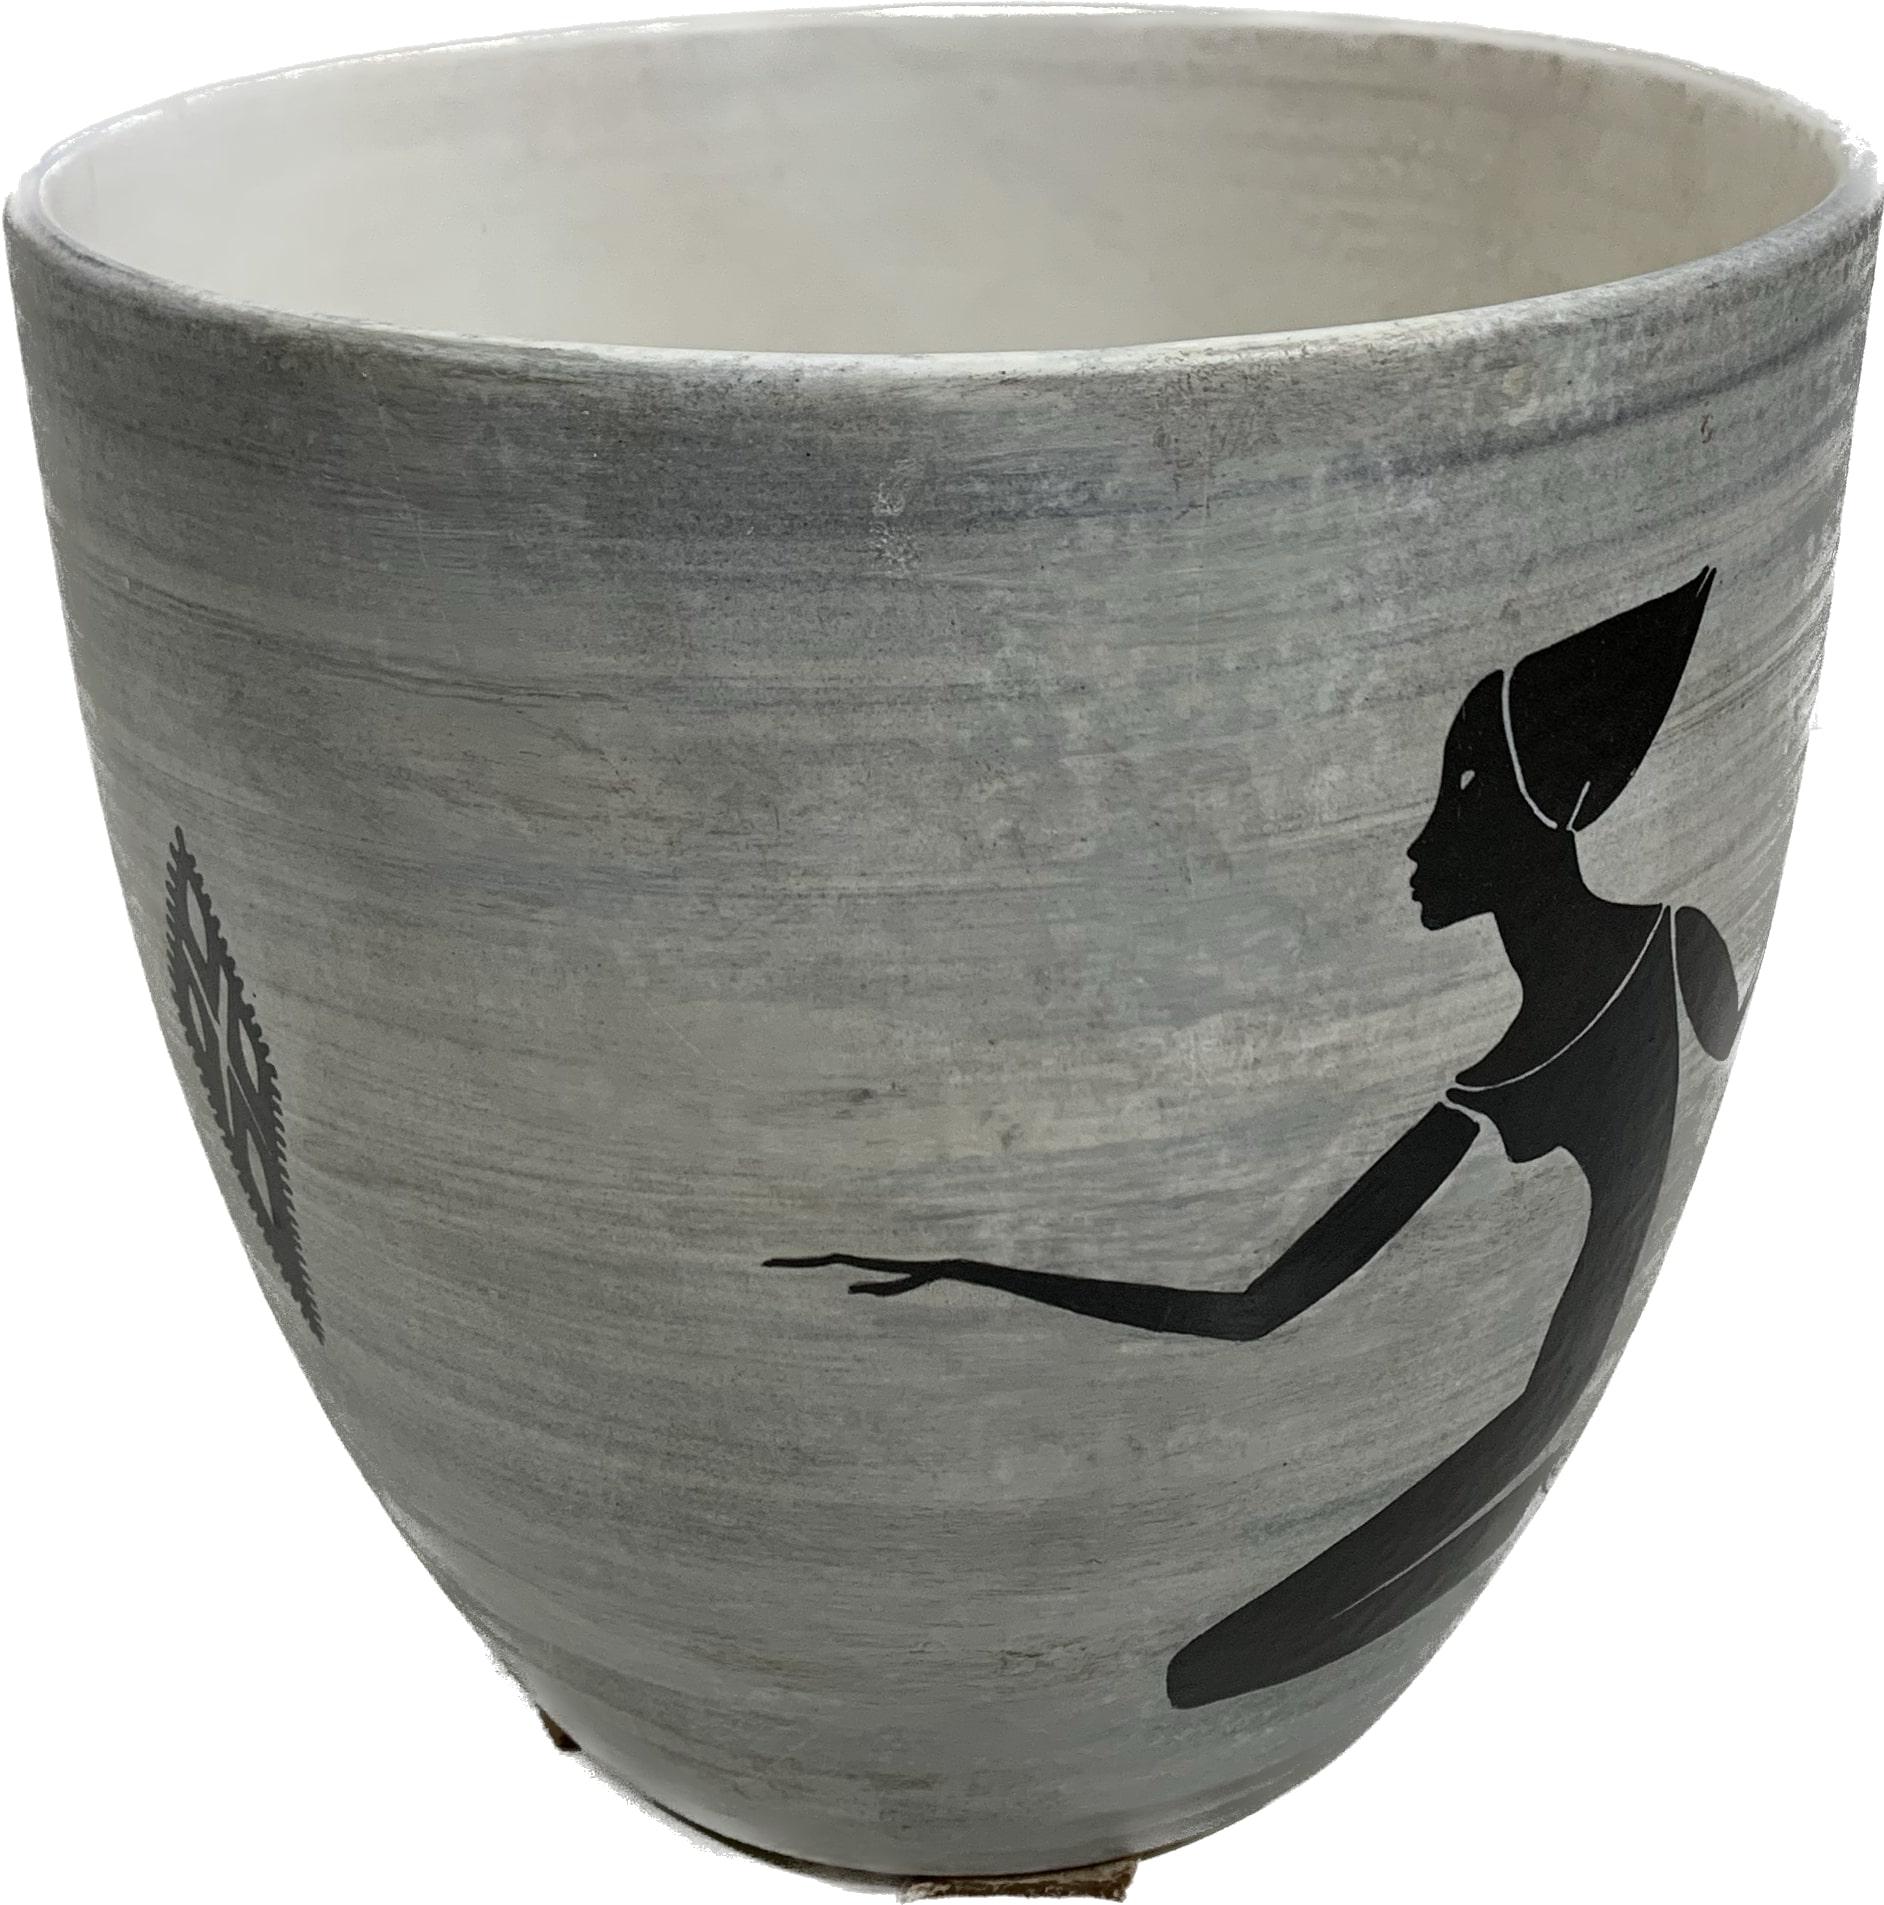 Beautiful “Cache-pot” or flowerpot in grès céramique with matte finish fabricated in Sèvres, France around 1930s. The material is typical from the Midcentury and the colour is of various grays. There is an ancient figurine as well as other little